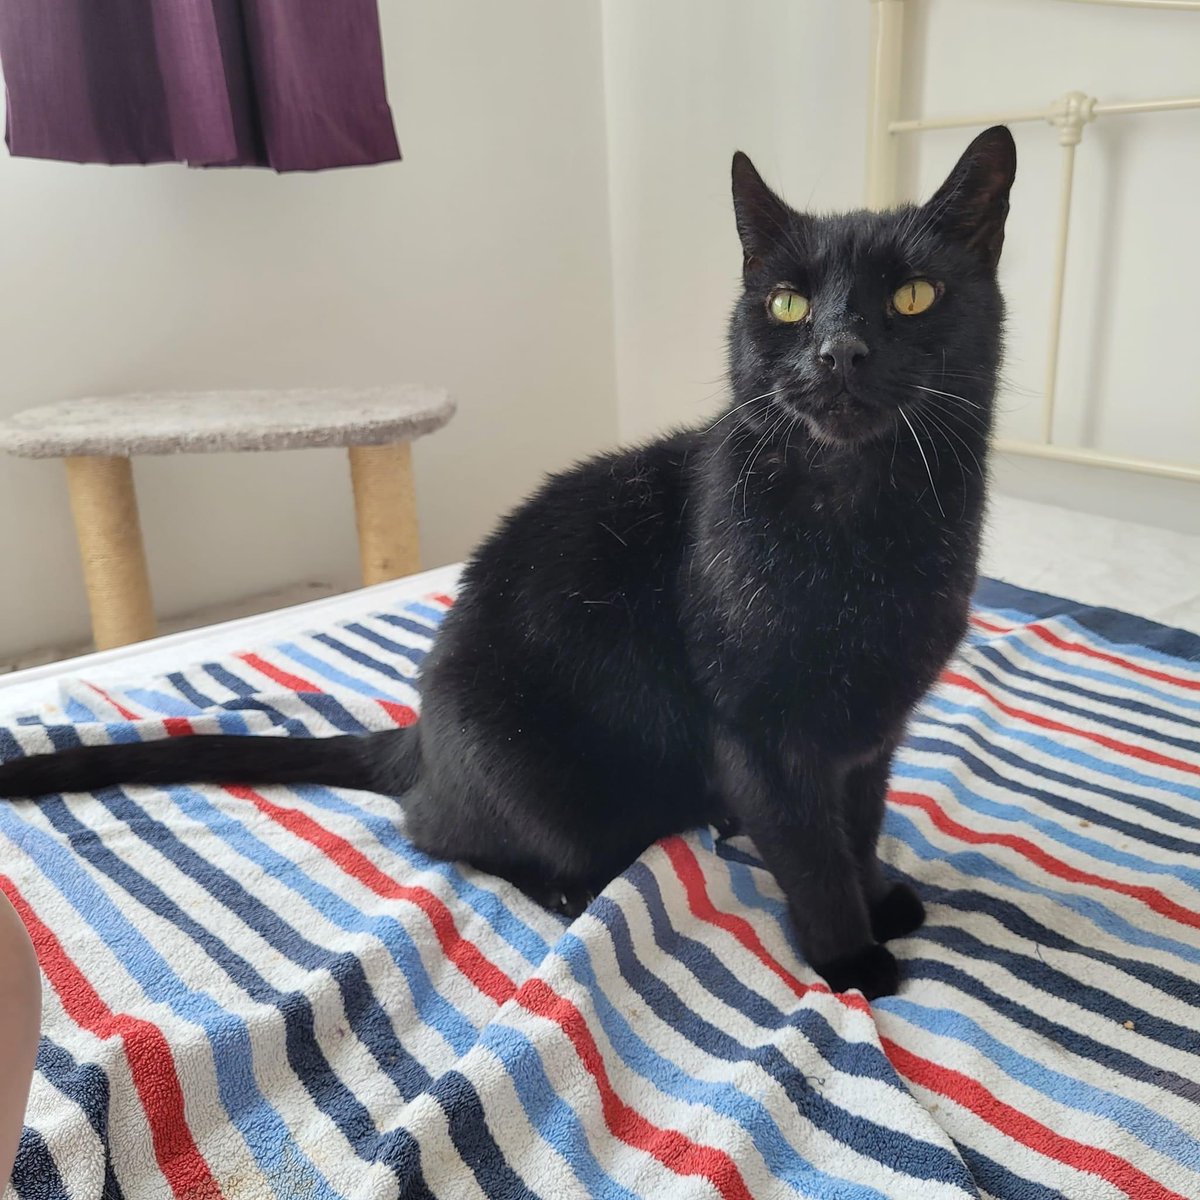 🖤 Adopt Tom 🖤

Senior, hyperthyroid boy Tom is a friendly mini panther looking for his #ForeverHome. He's full of love & joy. If you're ready to provide adopt and are financially comfortable to do so, consider Tom. Visit catcuddles.org.uk/cats/tom

#AdoptDontShop #SeniorCatLove